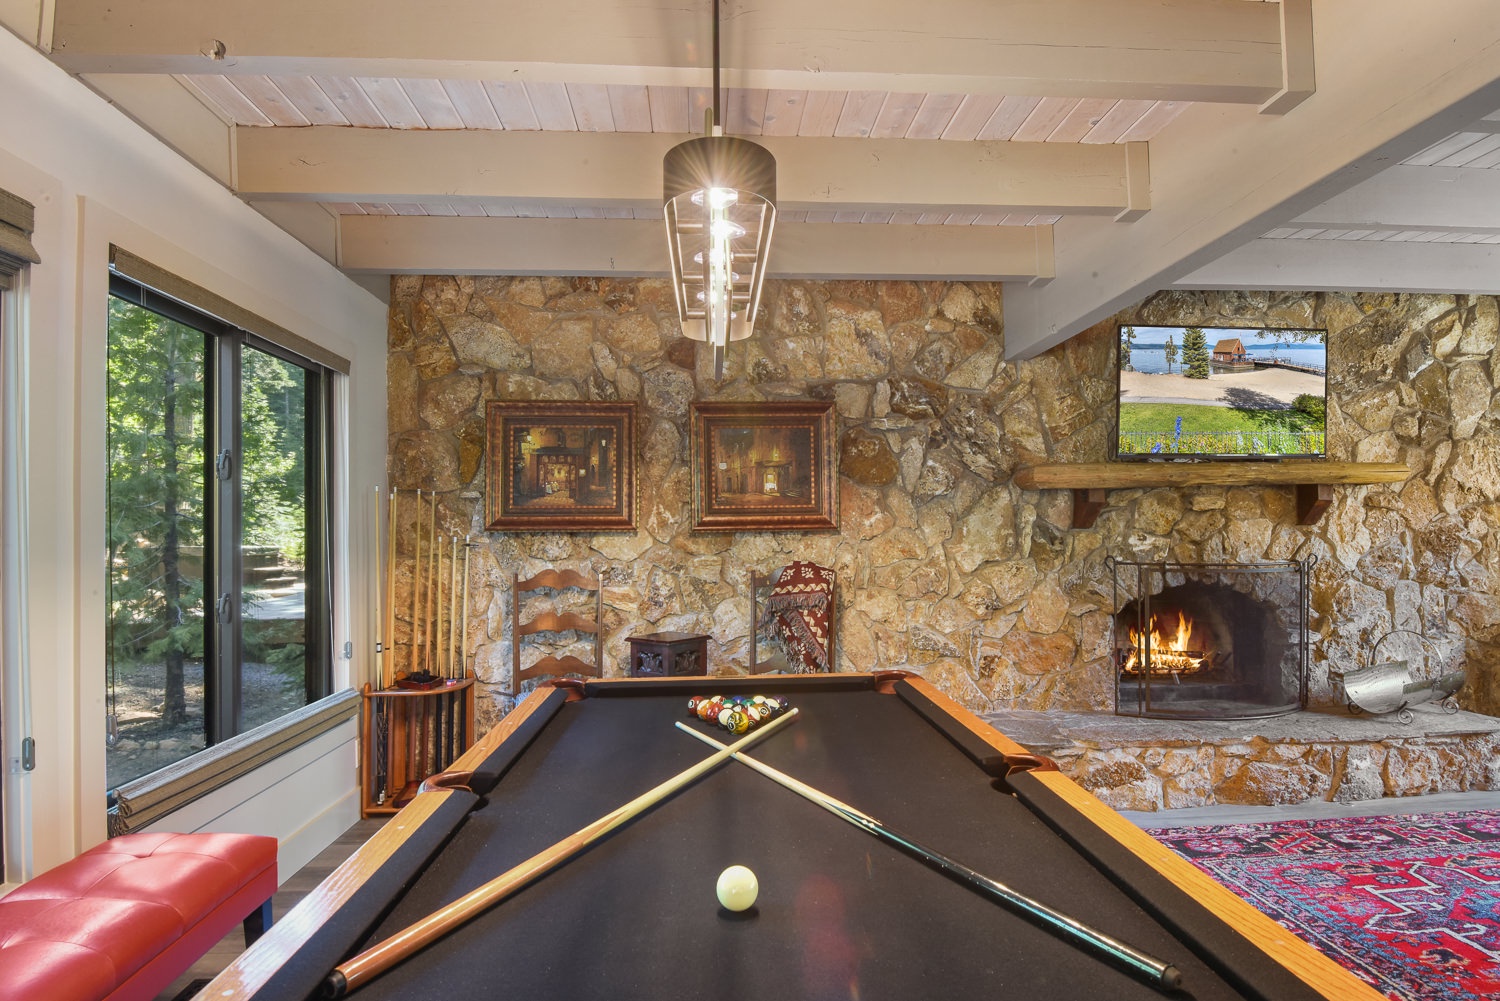 Pool Table in the living area